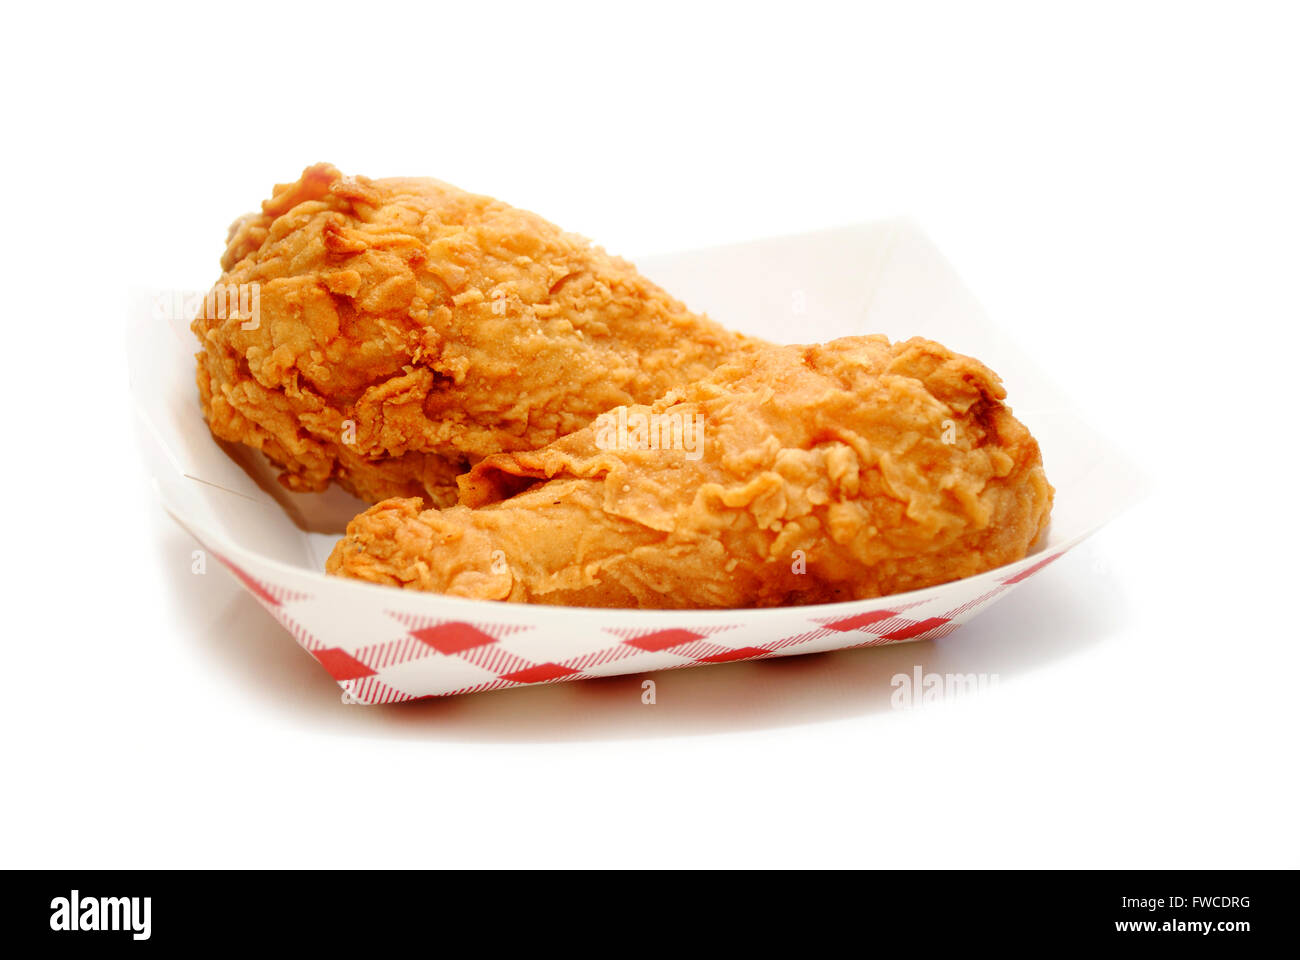 Fried Chicken Legs in a Take Out Container Stock Photo